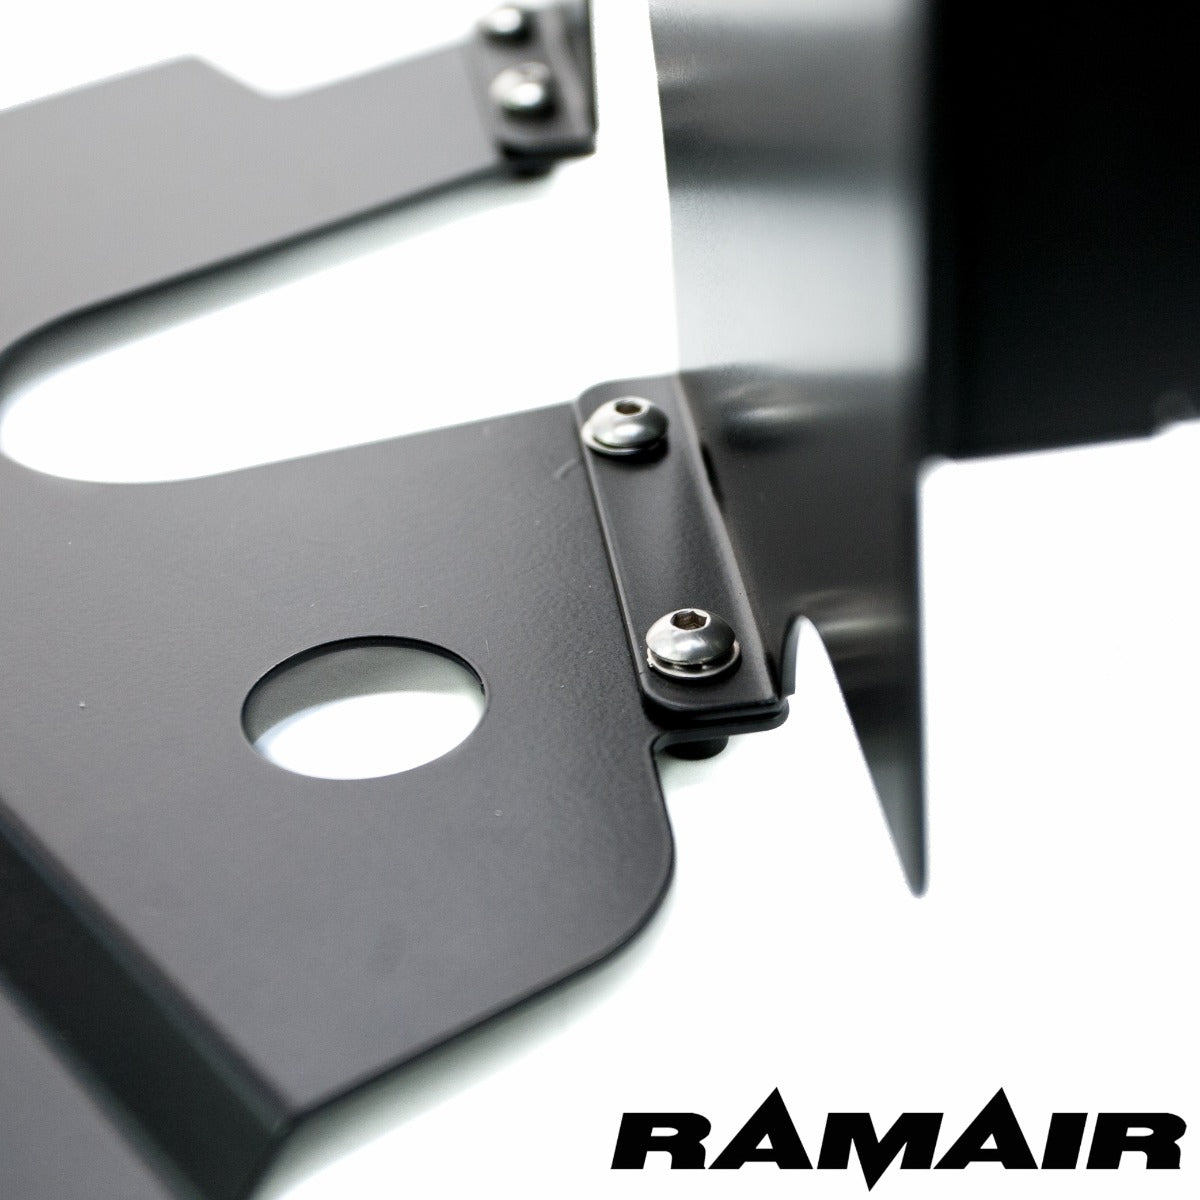 Ramair Stage 2 Oversized Induction Kit for VW Golf Mk5 GTI_4